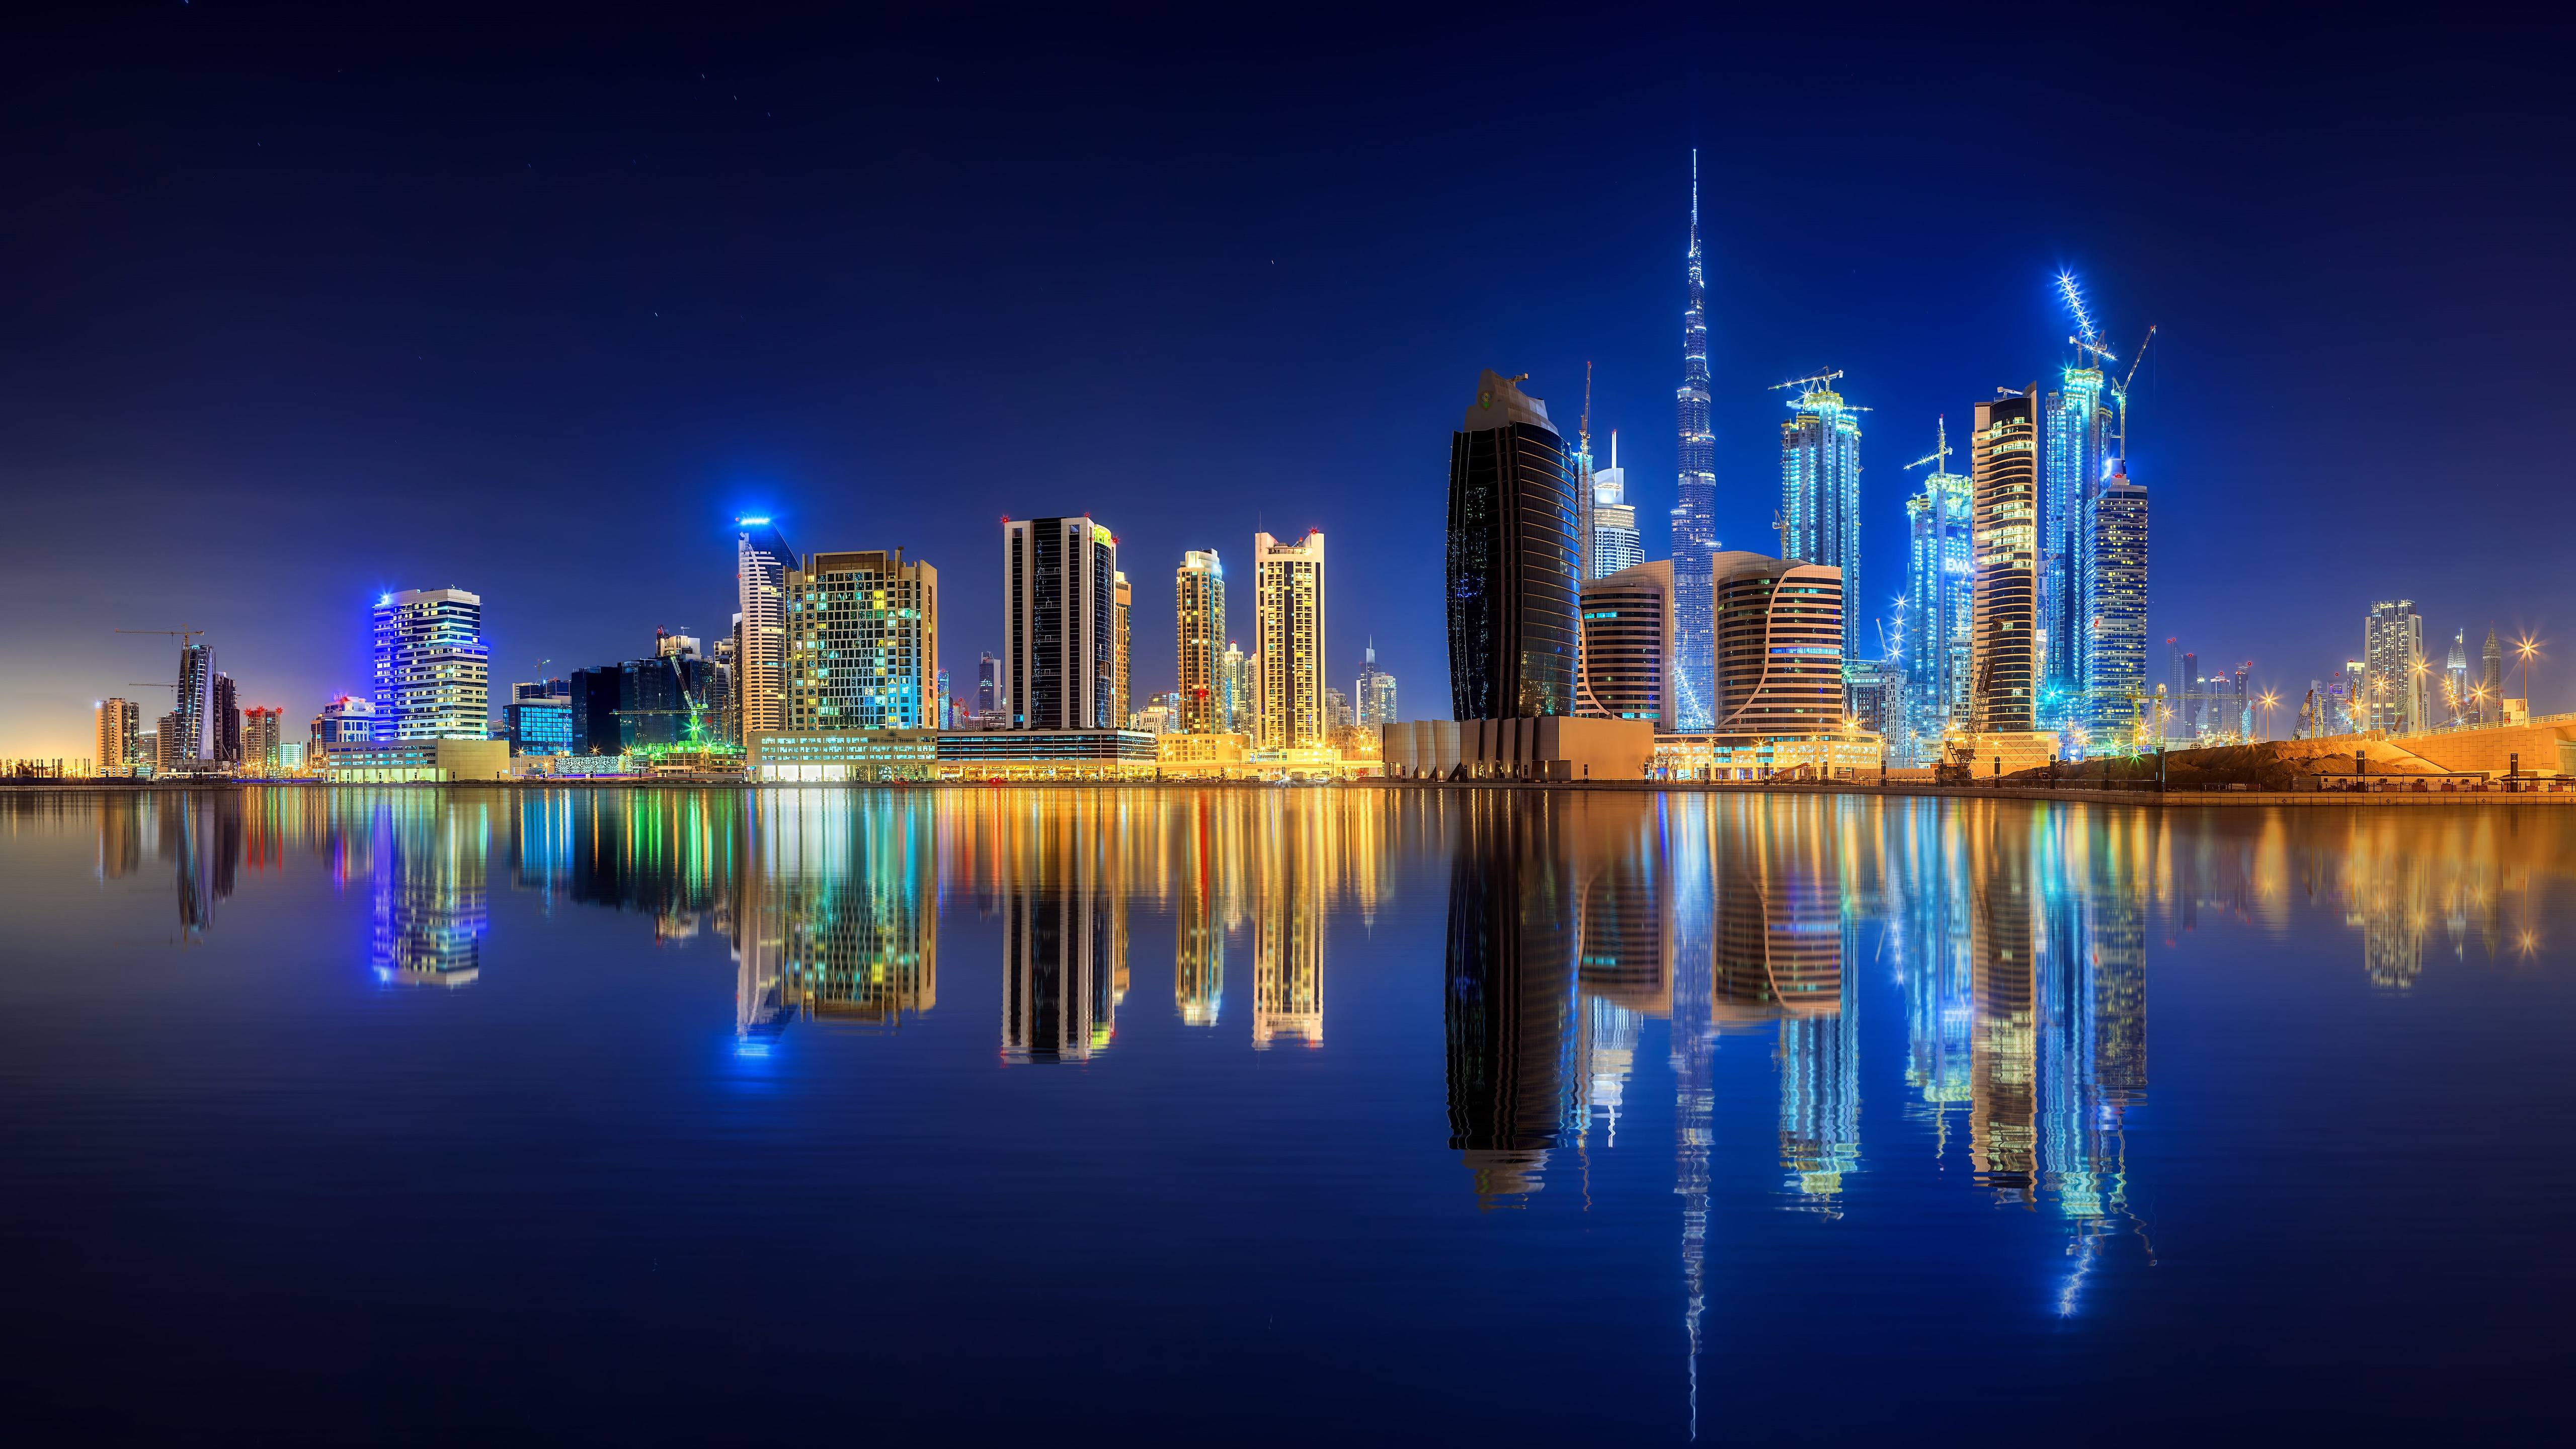 Dubai United Arab Emirates Persian Gulf Reflection In Water 4k Wallpapers  Hd & 8k Images For Desktop And Mobile 5120x2880 : 